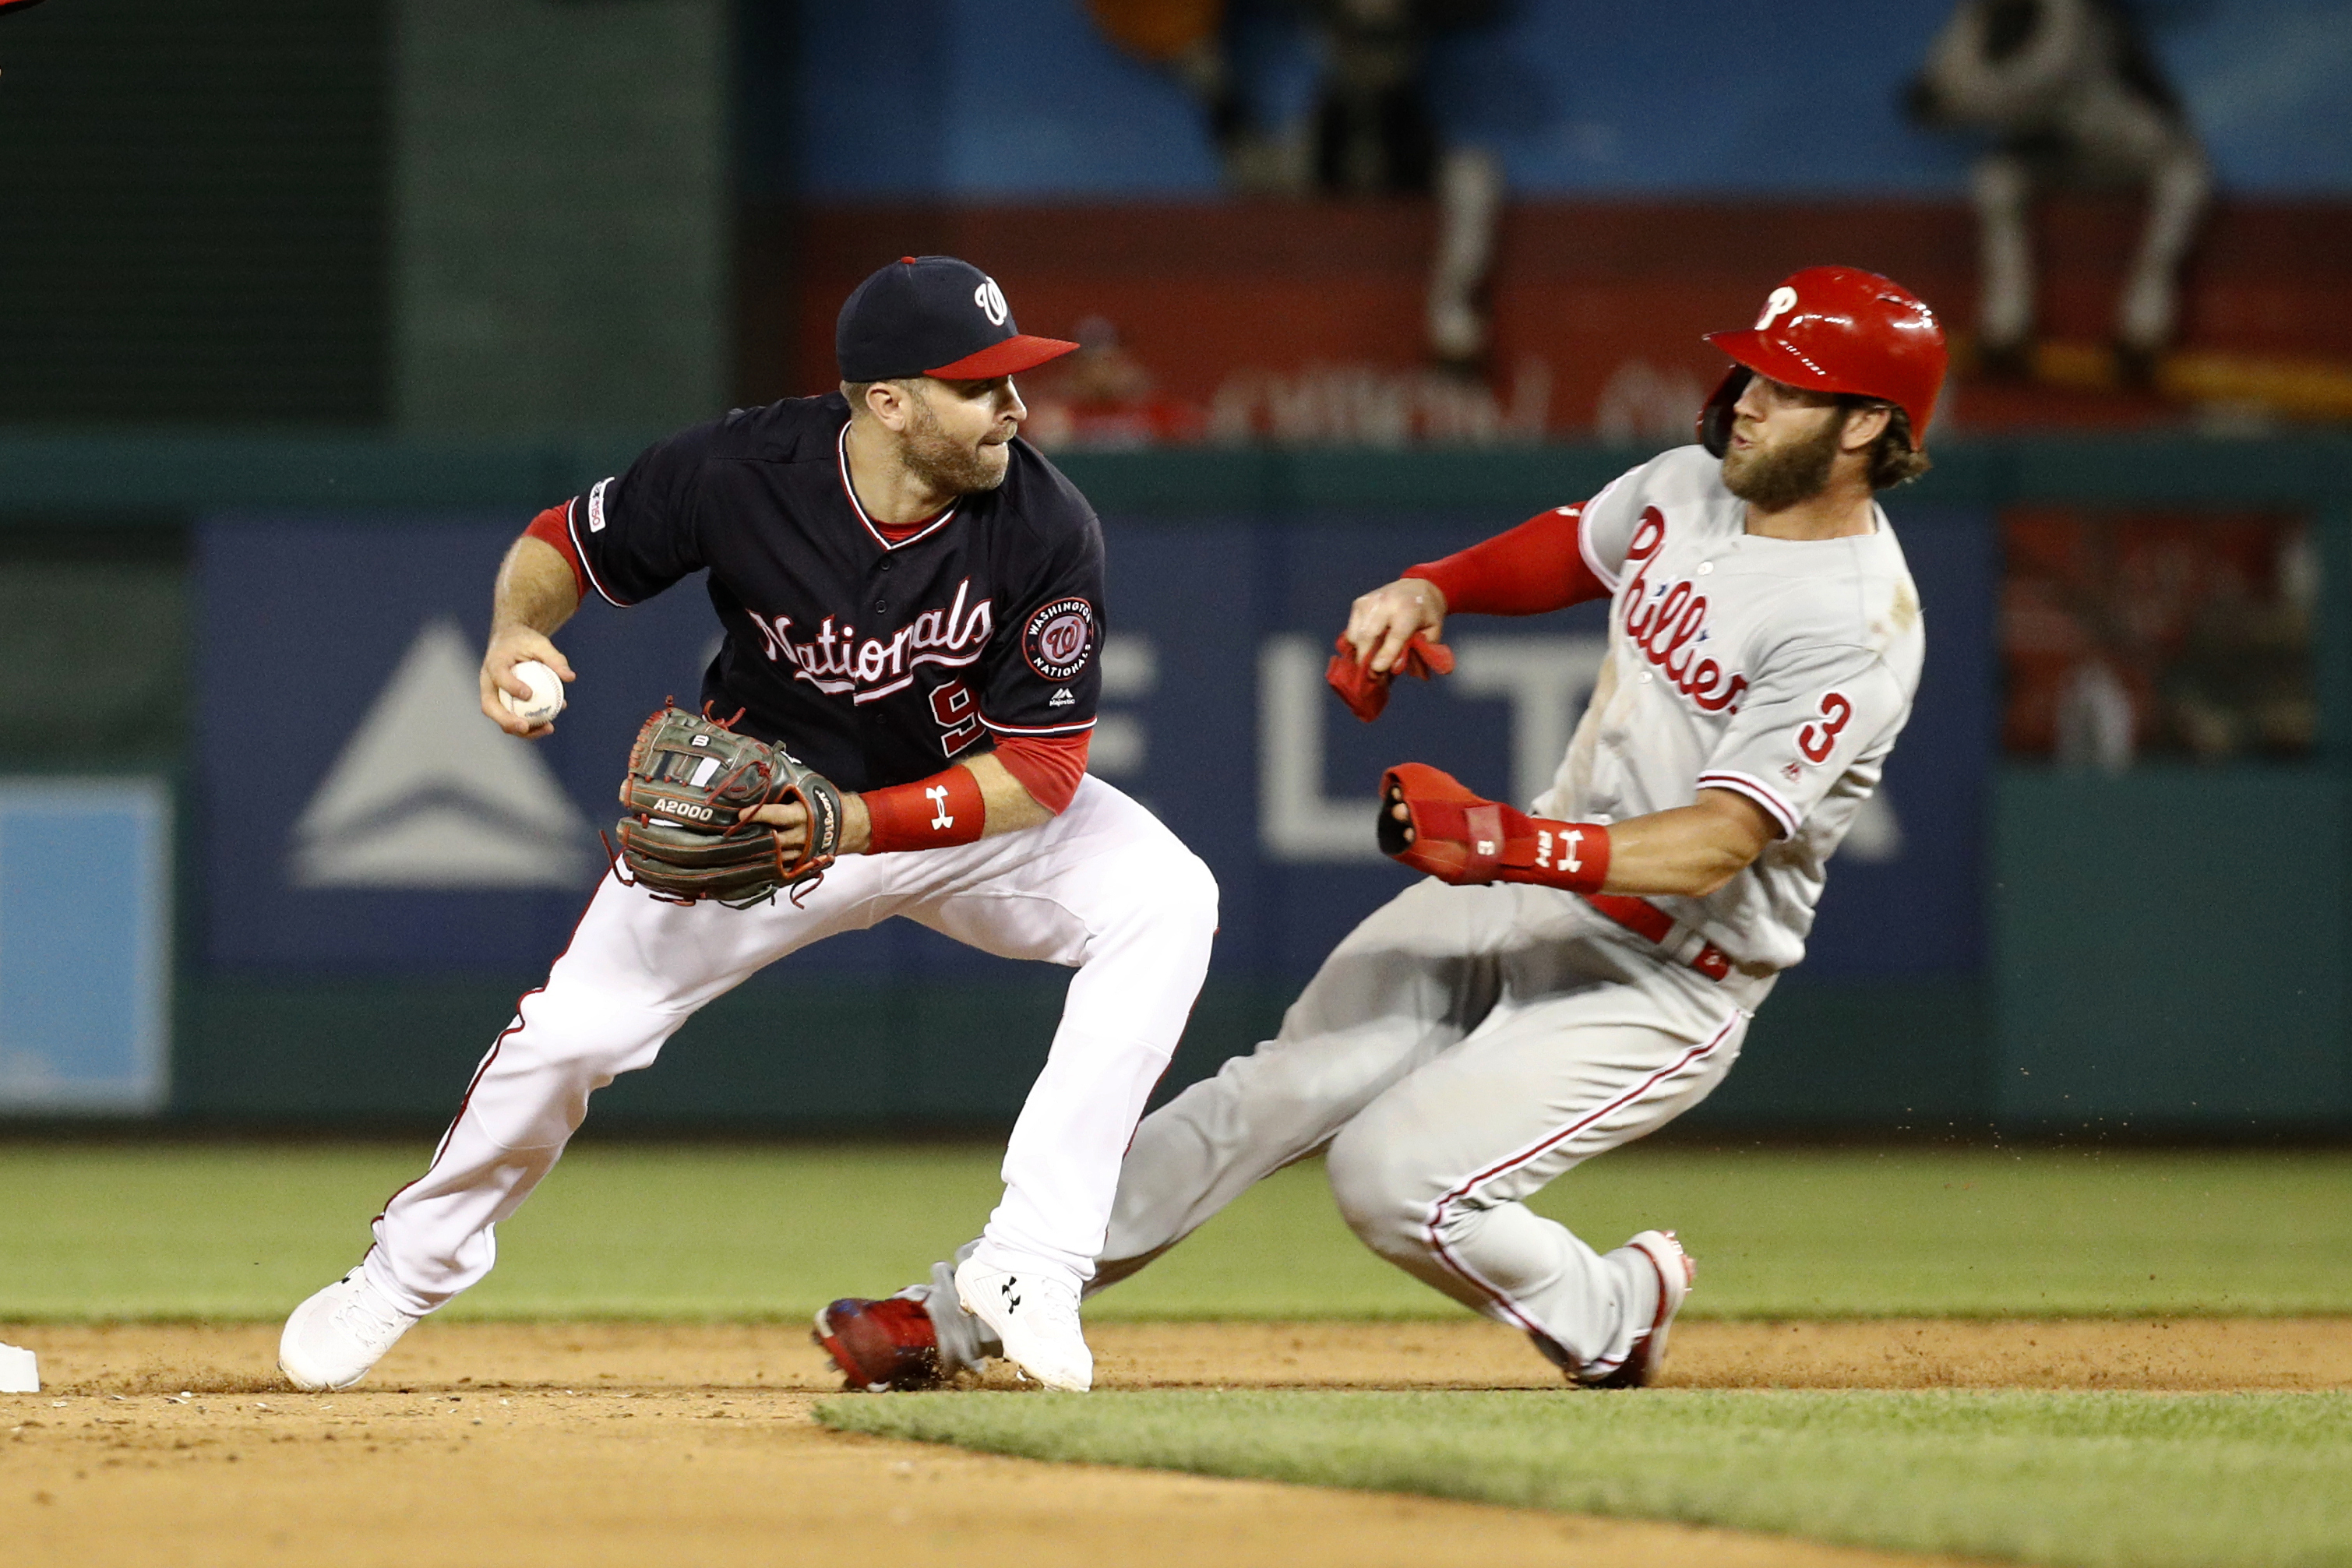 Real or fake? Here's how to determine if your Nats World Series